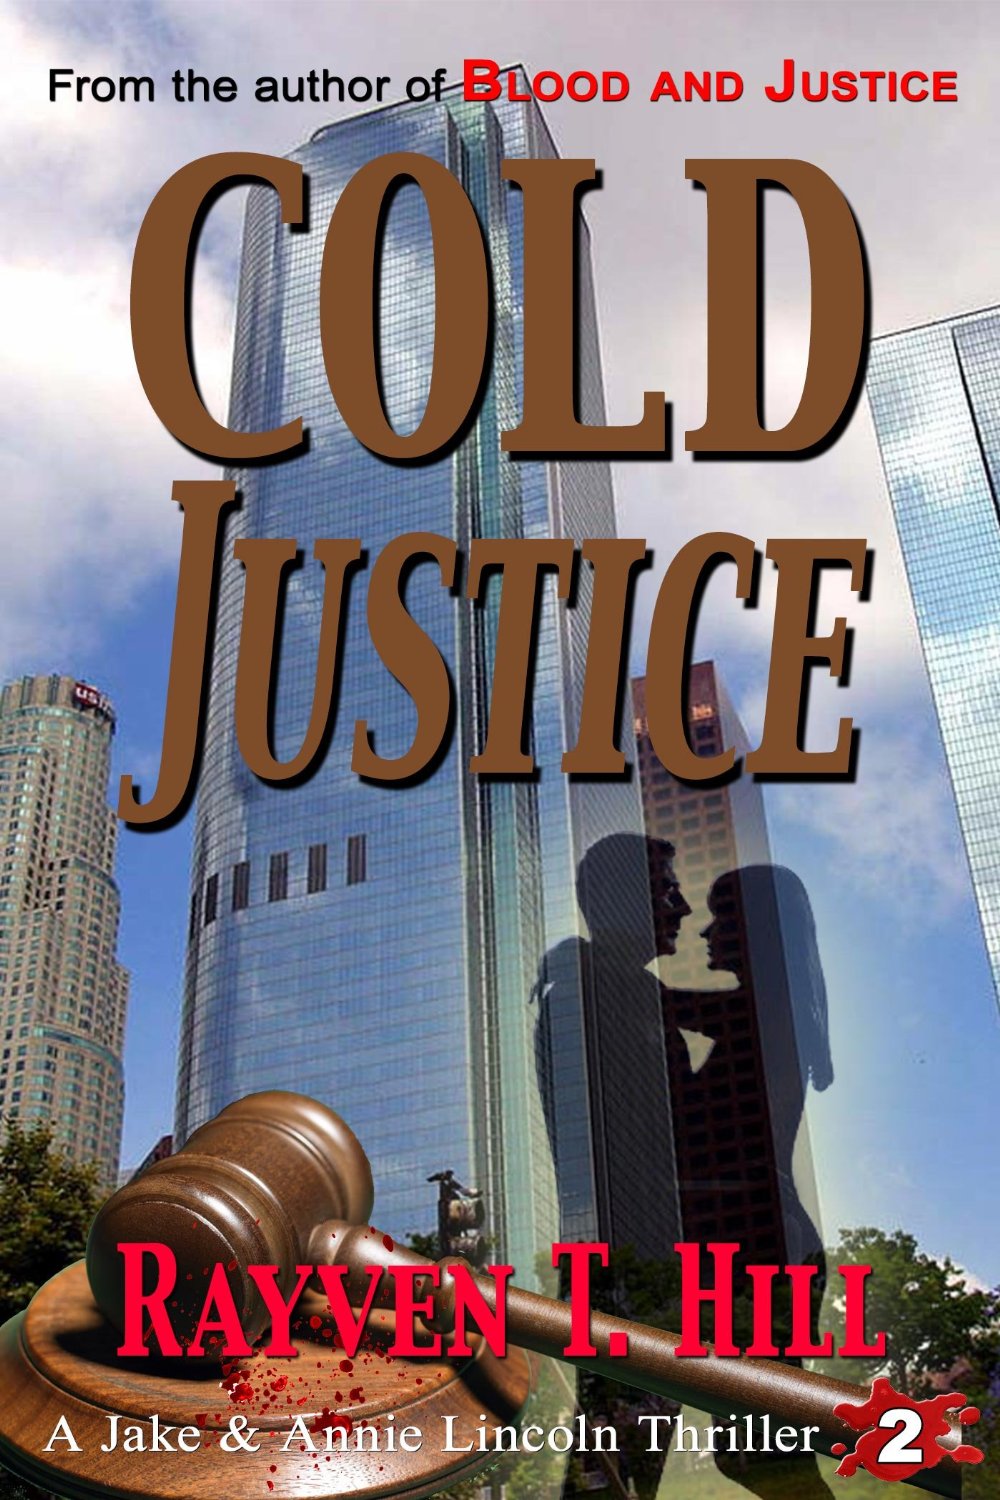 Cold Justice: A Private Investigator Mystery Series (A Jake & Annie Lincoln Thriller Book 2) by Rayven T. Hill